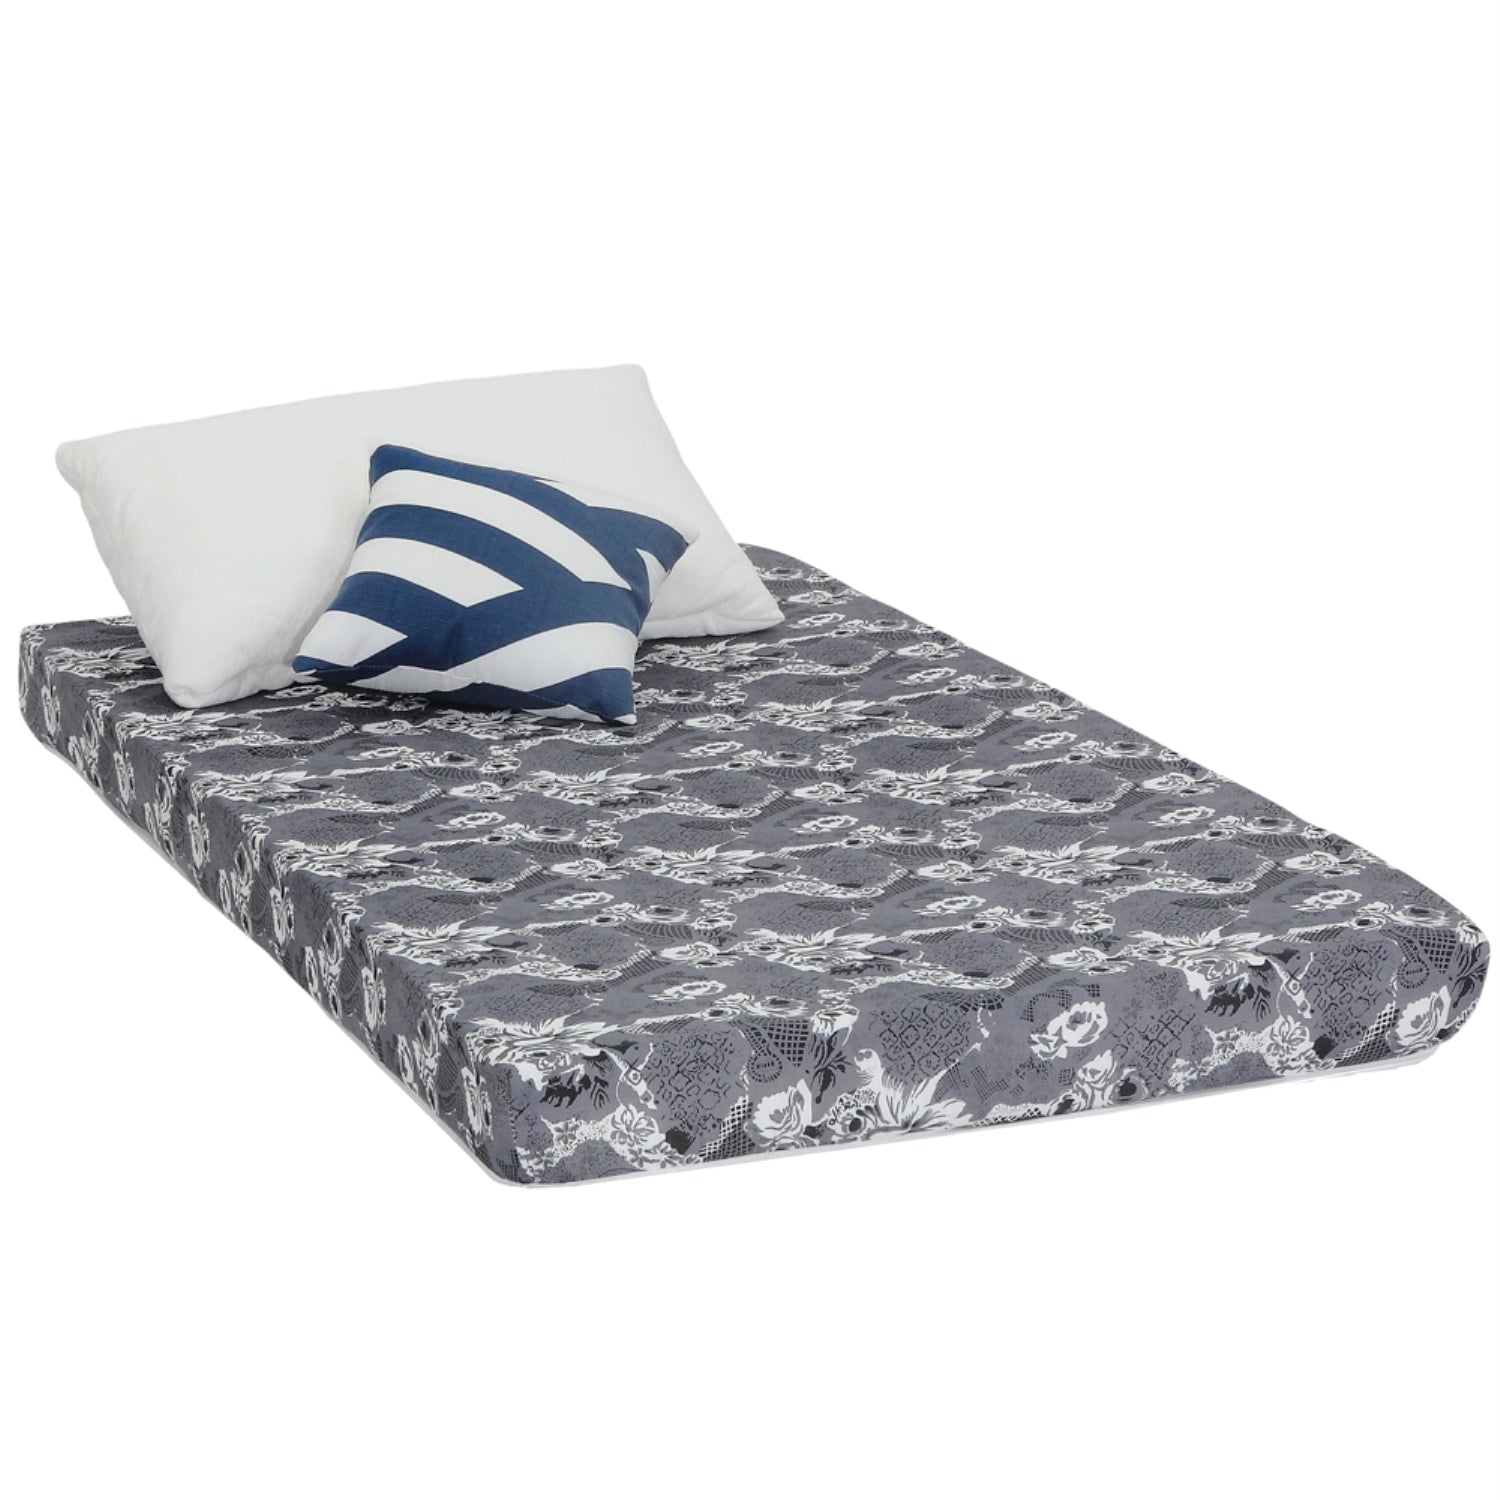 ViscoLogic ECONO Flip able Reversible Foam Mattress with Cover Good for Bunk Bed, Trundle, Guest Bed and Caravan Bed